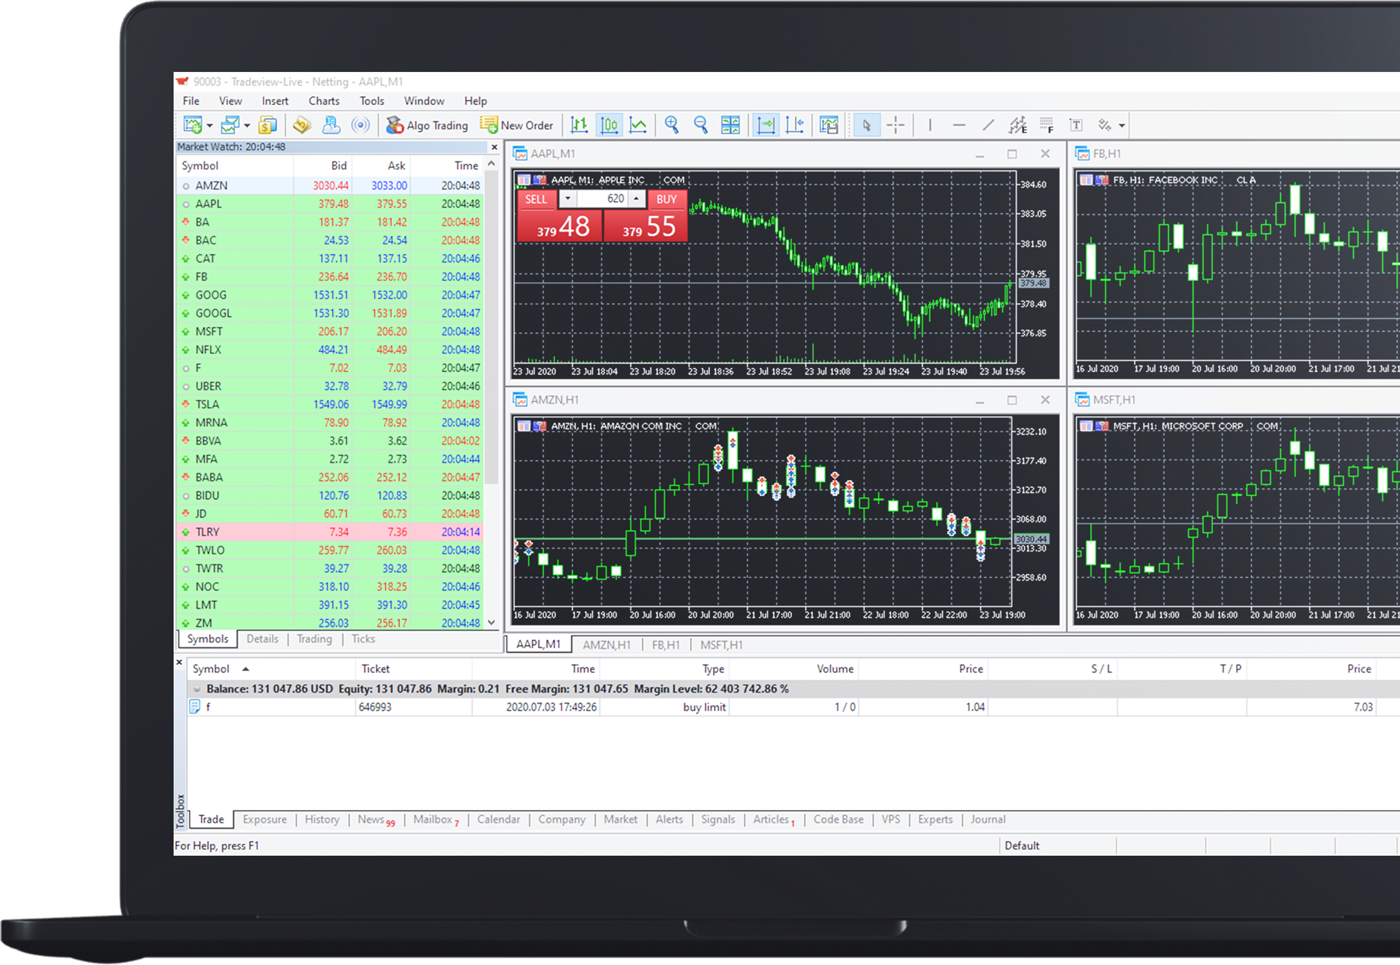 Metratrader 5 allows Tradeview customers to trade within the financial markets from any browser and operating system (Windows, Mac, Linux).